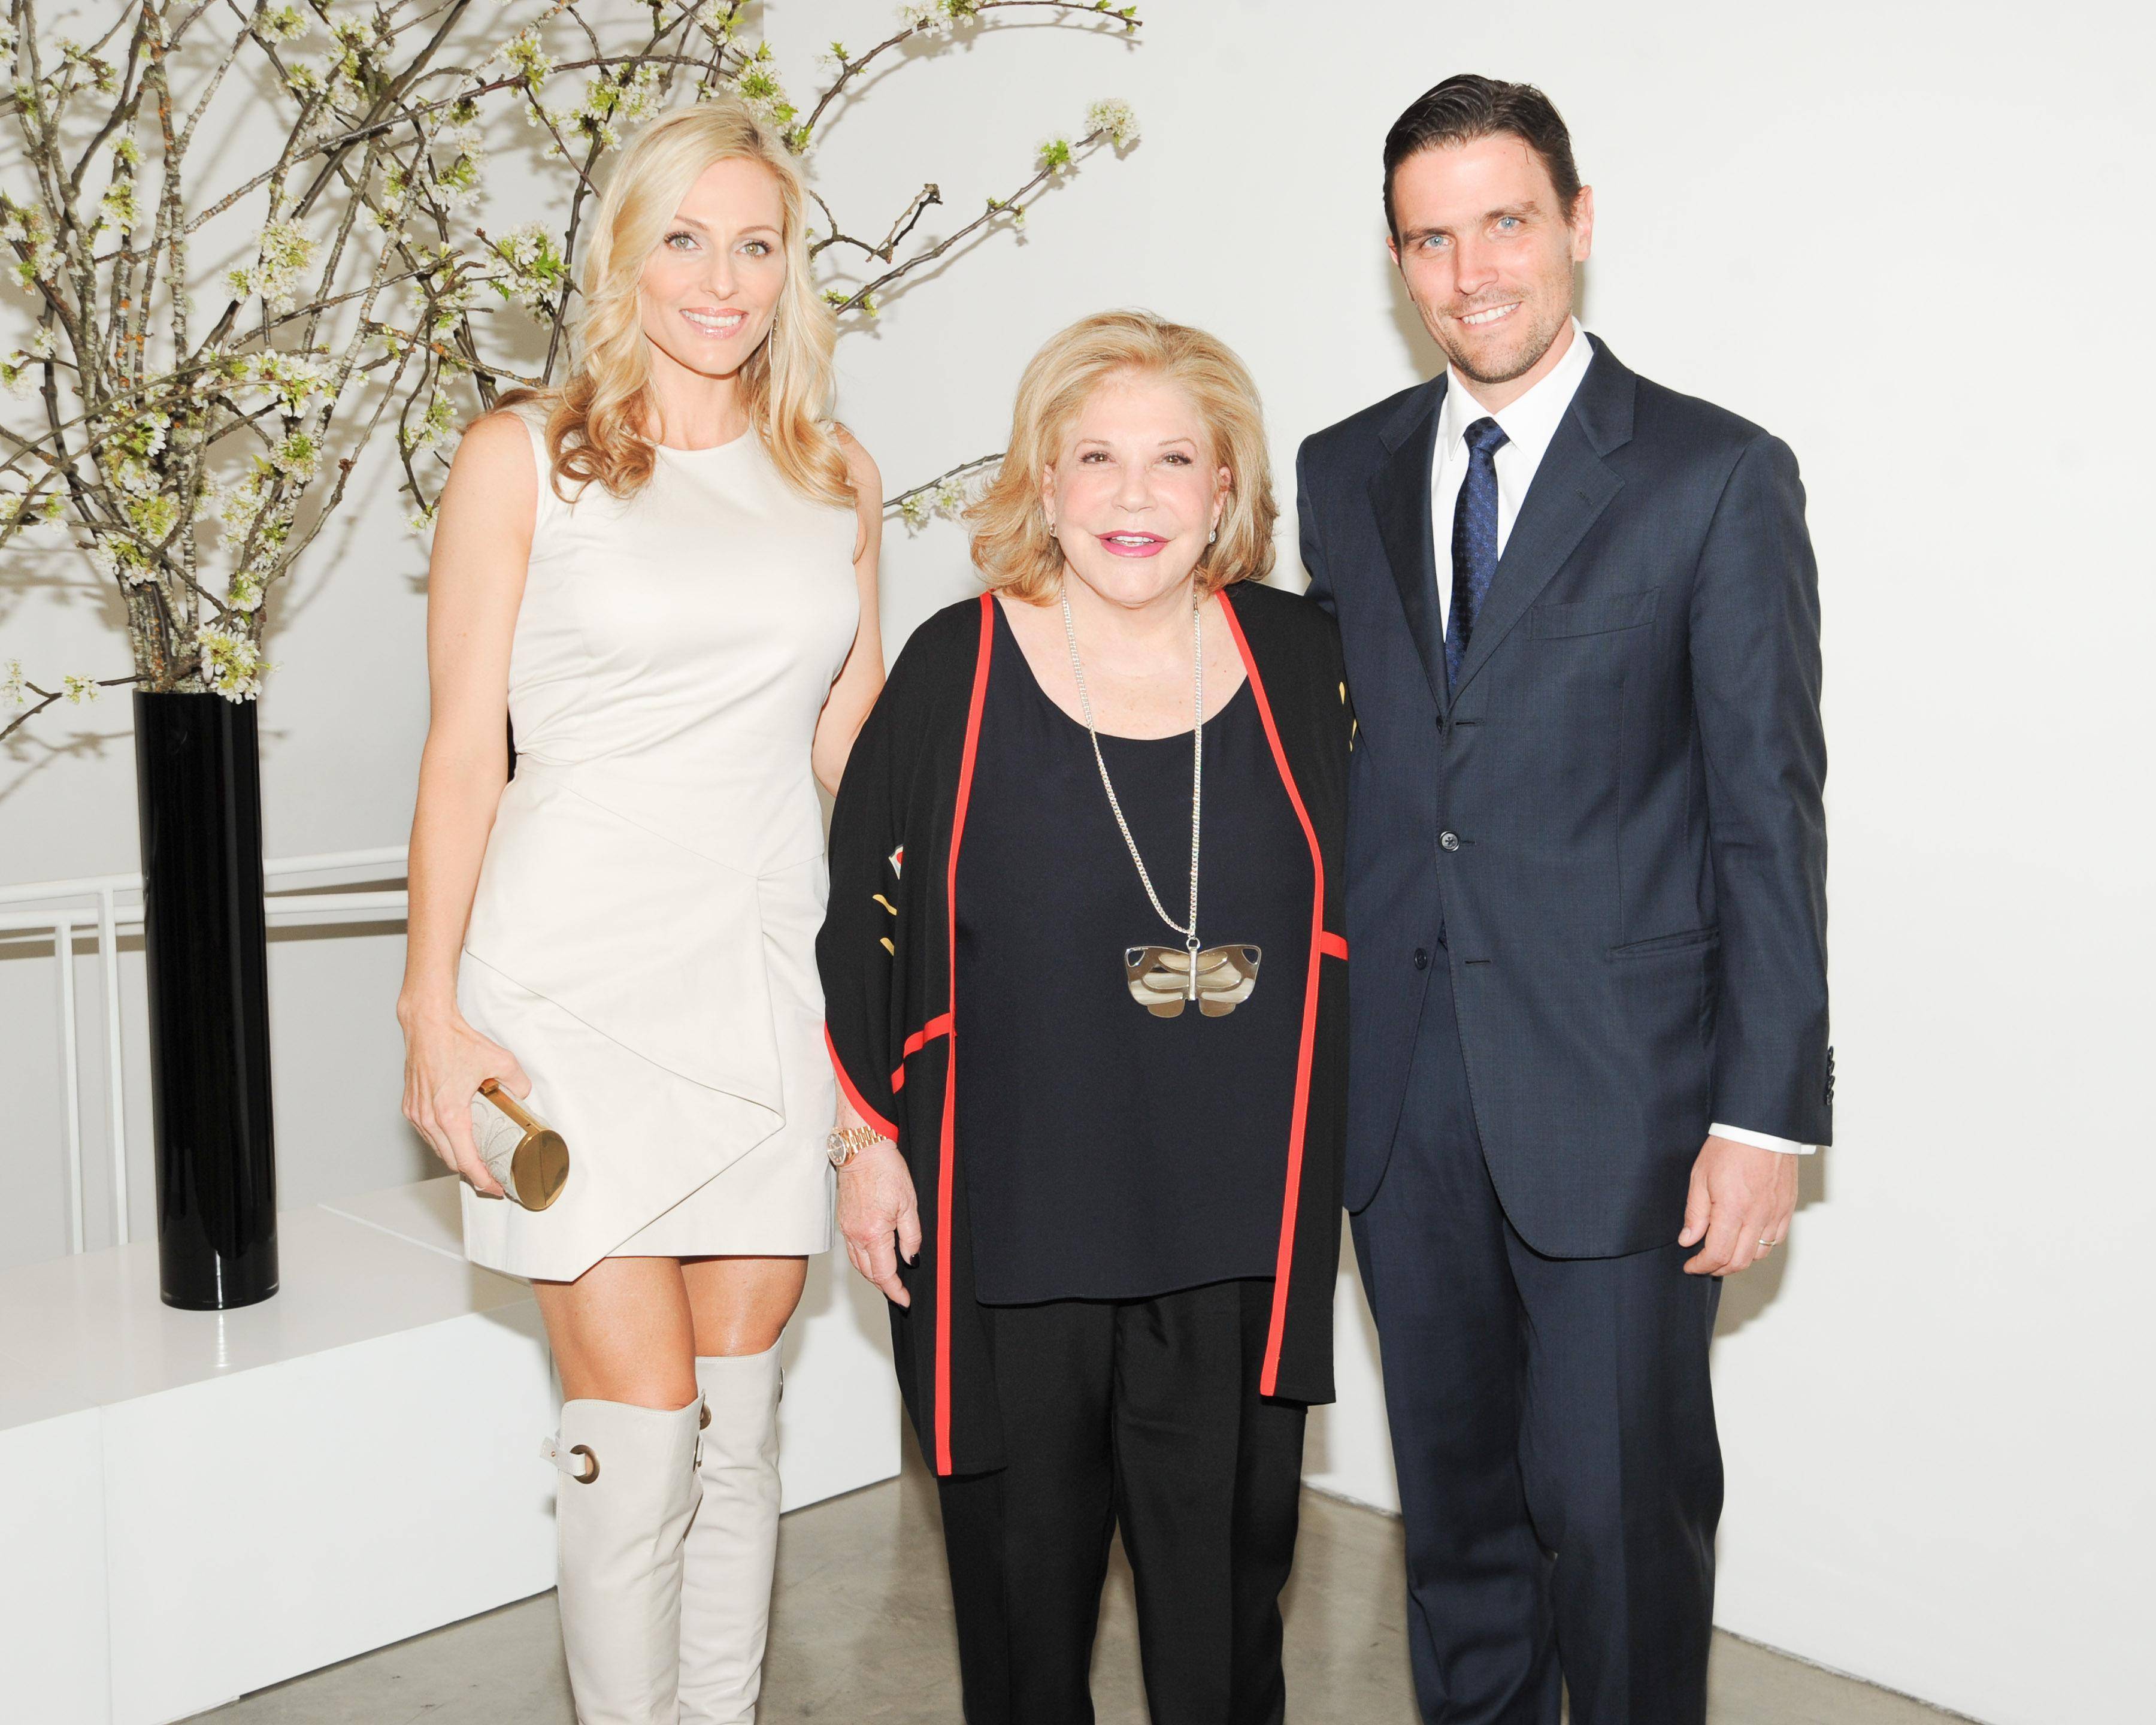 FERRAGAMO Hosts Cocktails to Announce the Inaugural Opening Gala for the WALLIS ANNENBERG CENTER For The PERFORMING ARTS